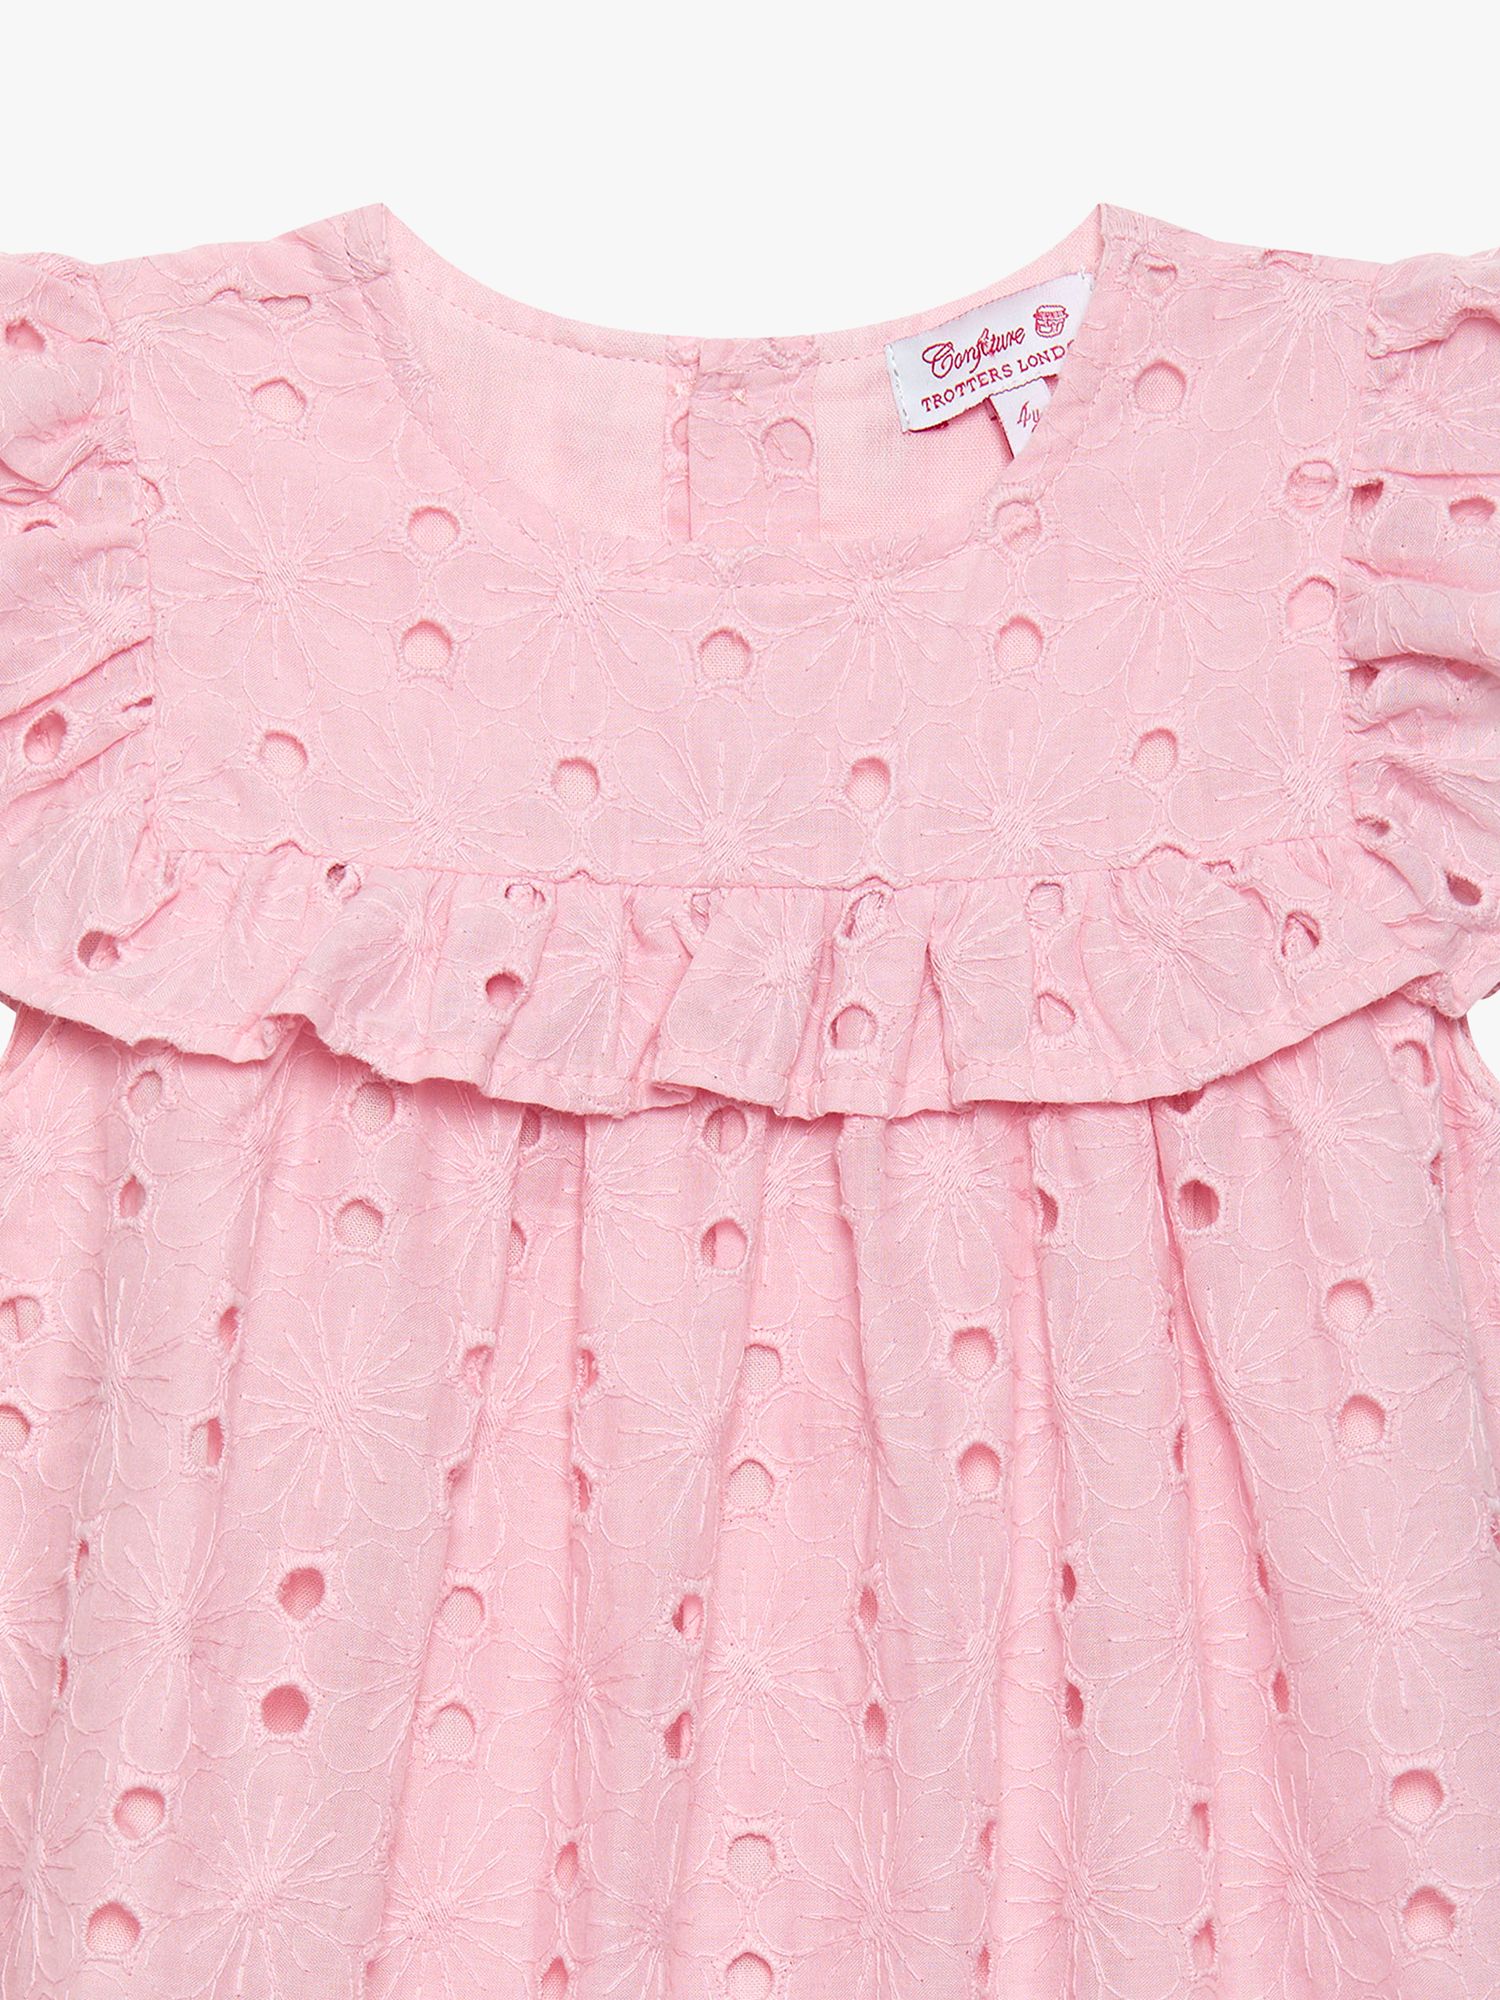 Trotters Kids' Eliza Broderie Anglaise Ruffle Dress, Pink, 10-11 years